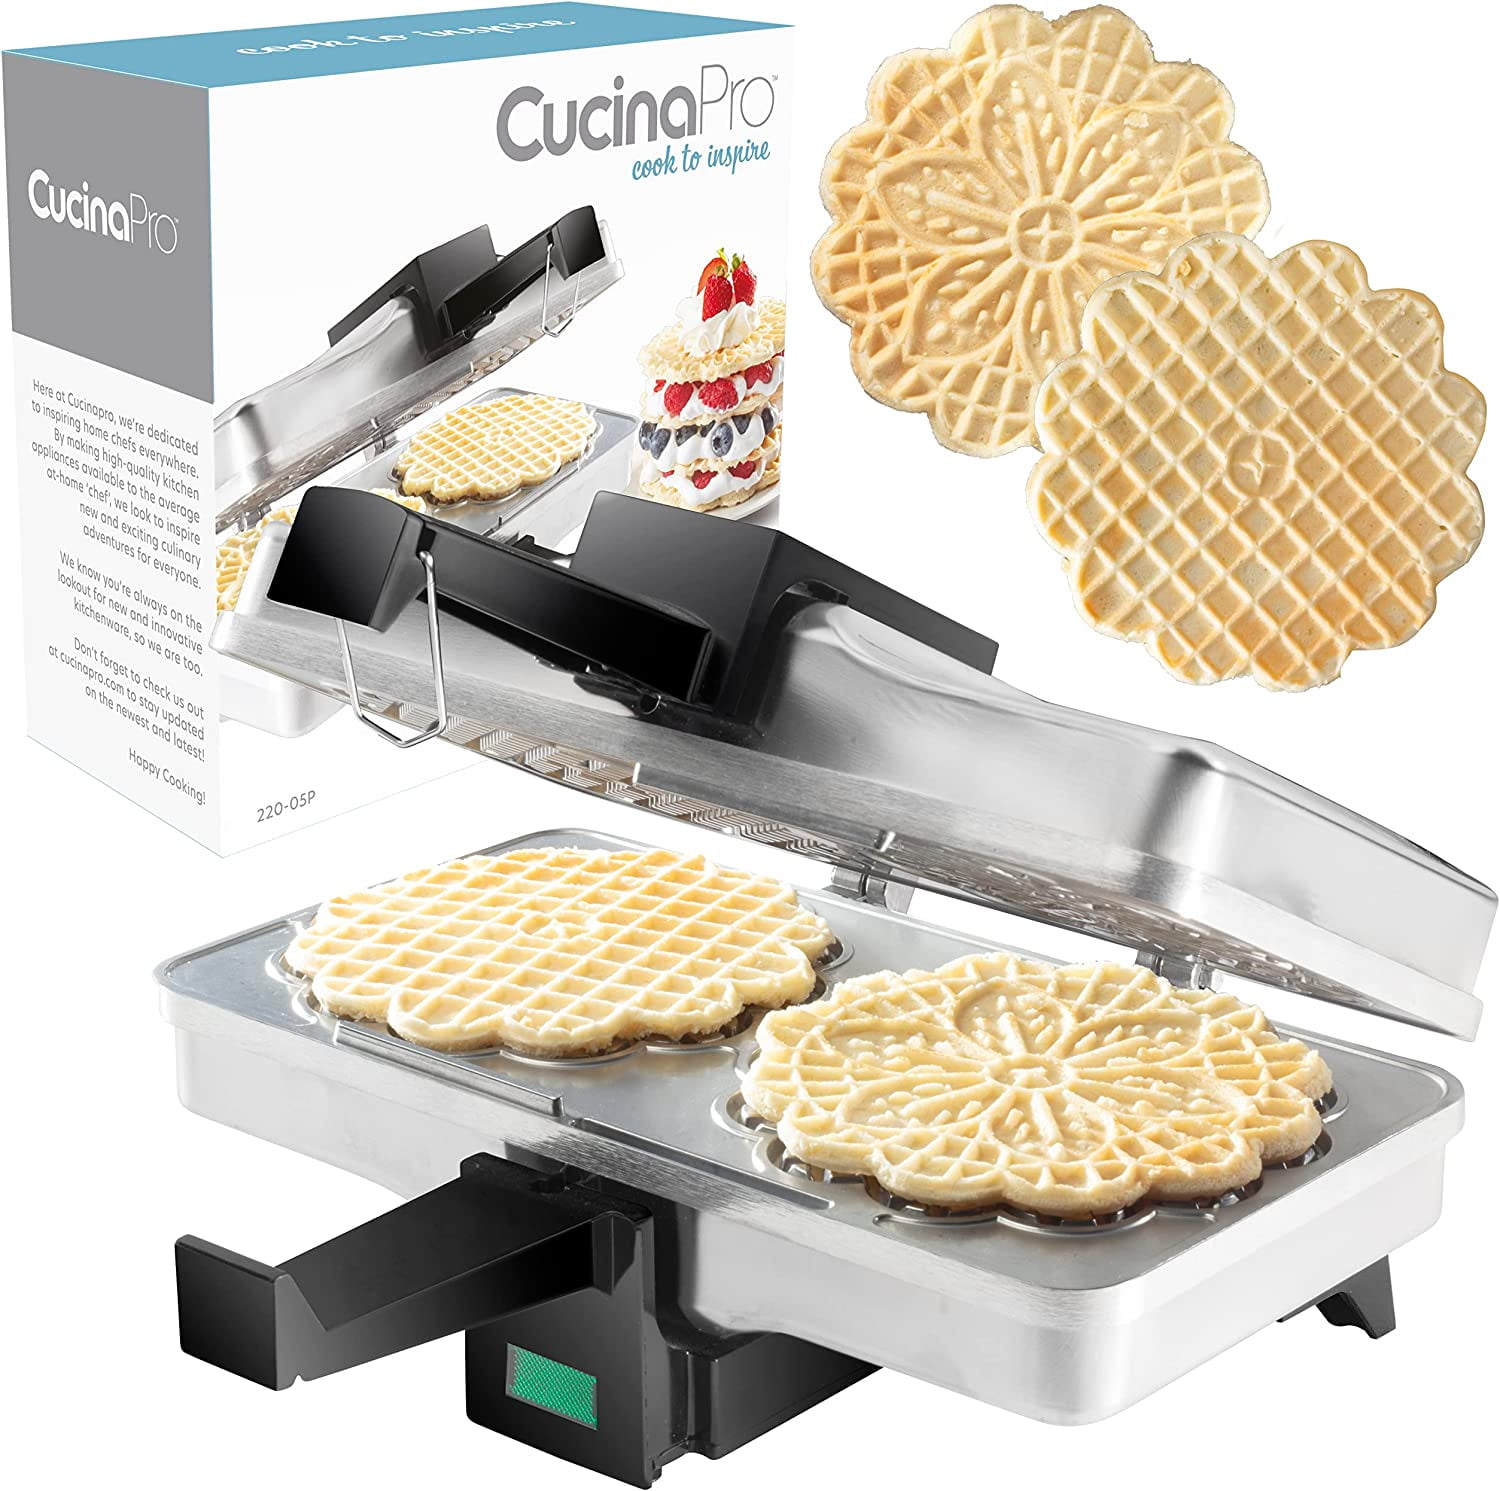 CucinaPro Pizzelle Maker - Polished Electric Baker Press Makes Two 5-Inch  Cookies at Once - Recipe Guide Included - Easter Holiday Dessert Treat